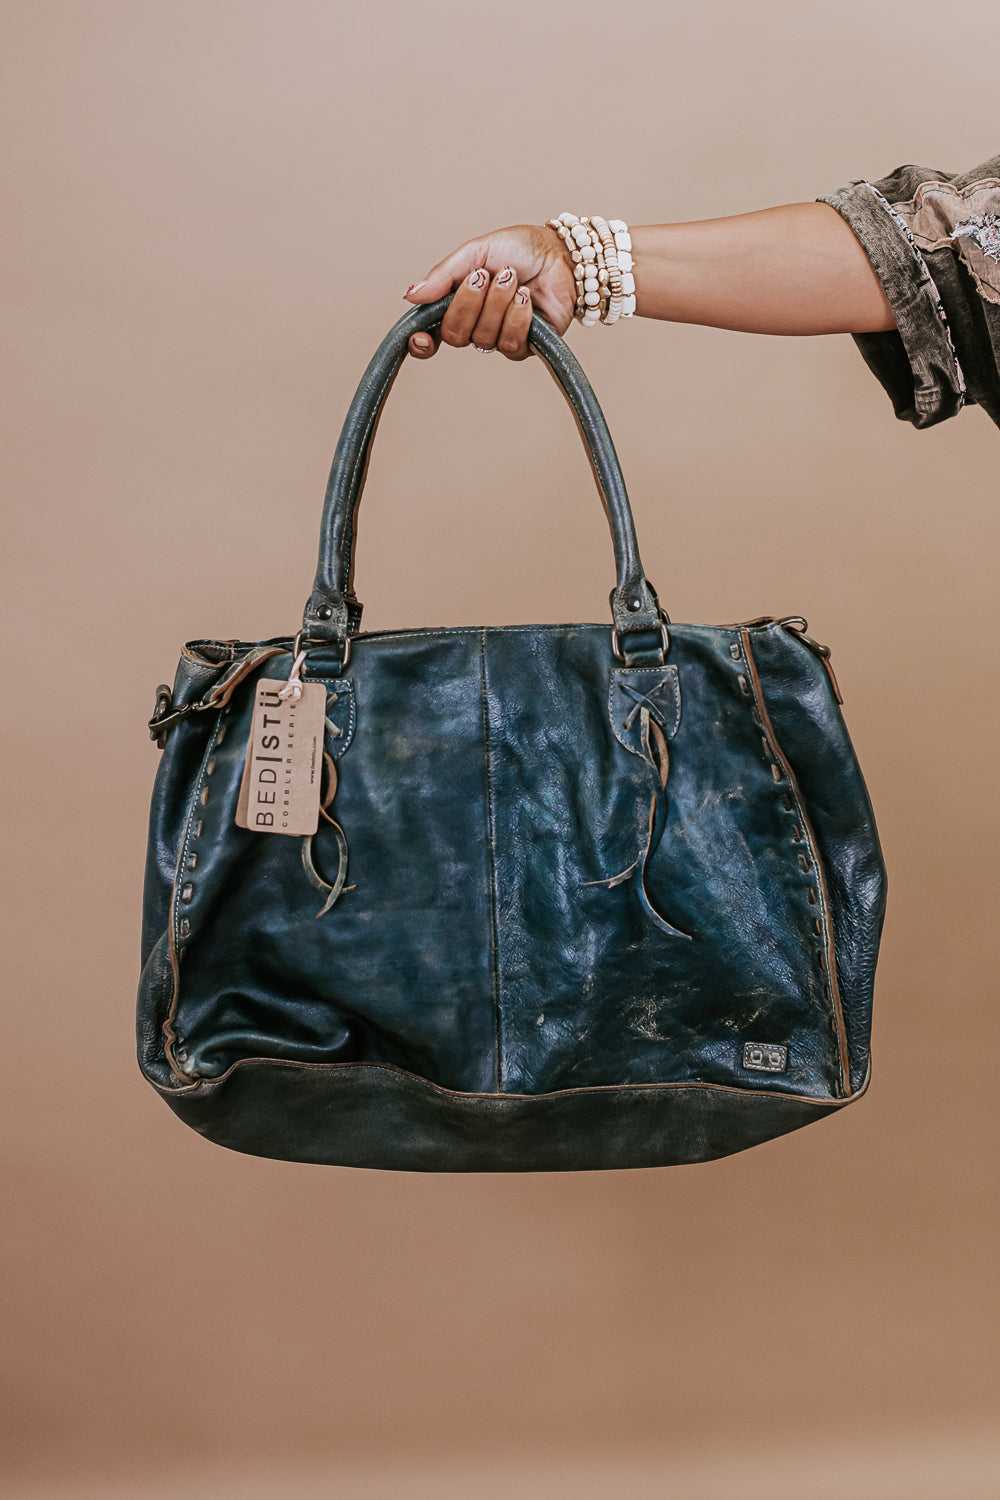 Rockaway Leather Tote, Dark Teal Lux – Everyday Chic Boutique